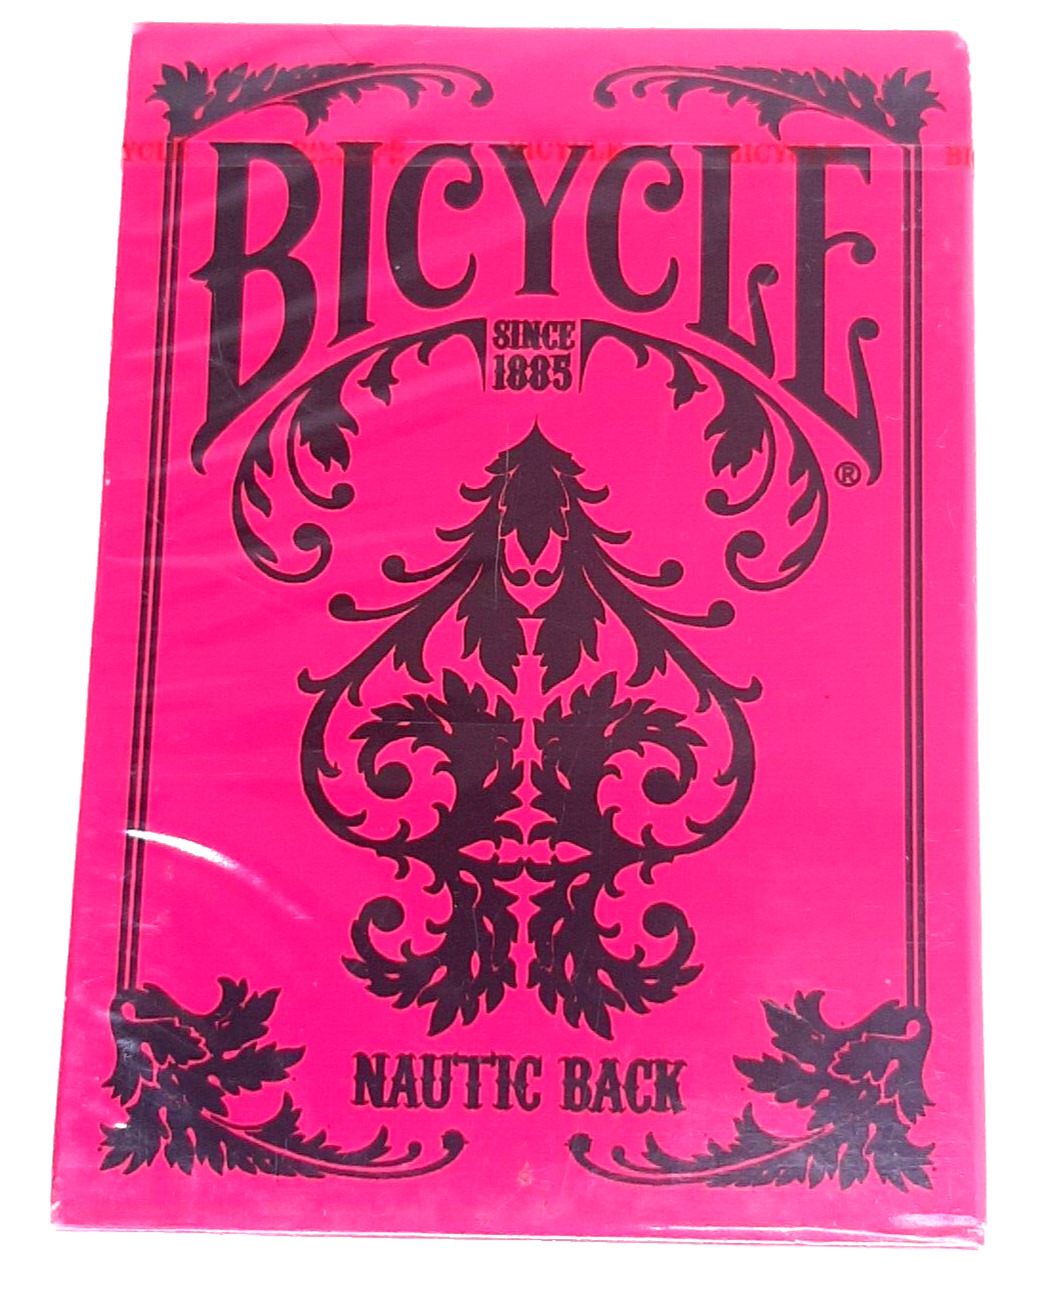 Bicycle Hot Pink & Black Nautic Back Standard Size Playing Card Deck New Sealed